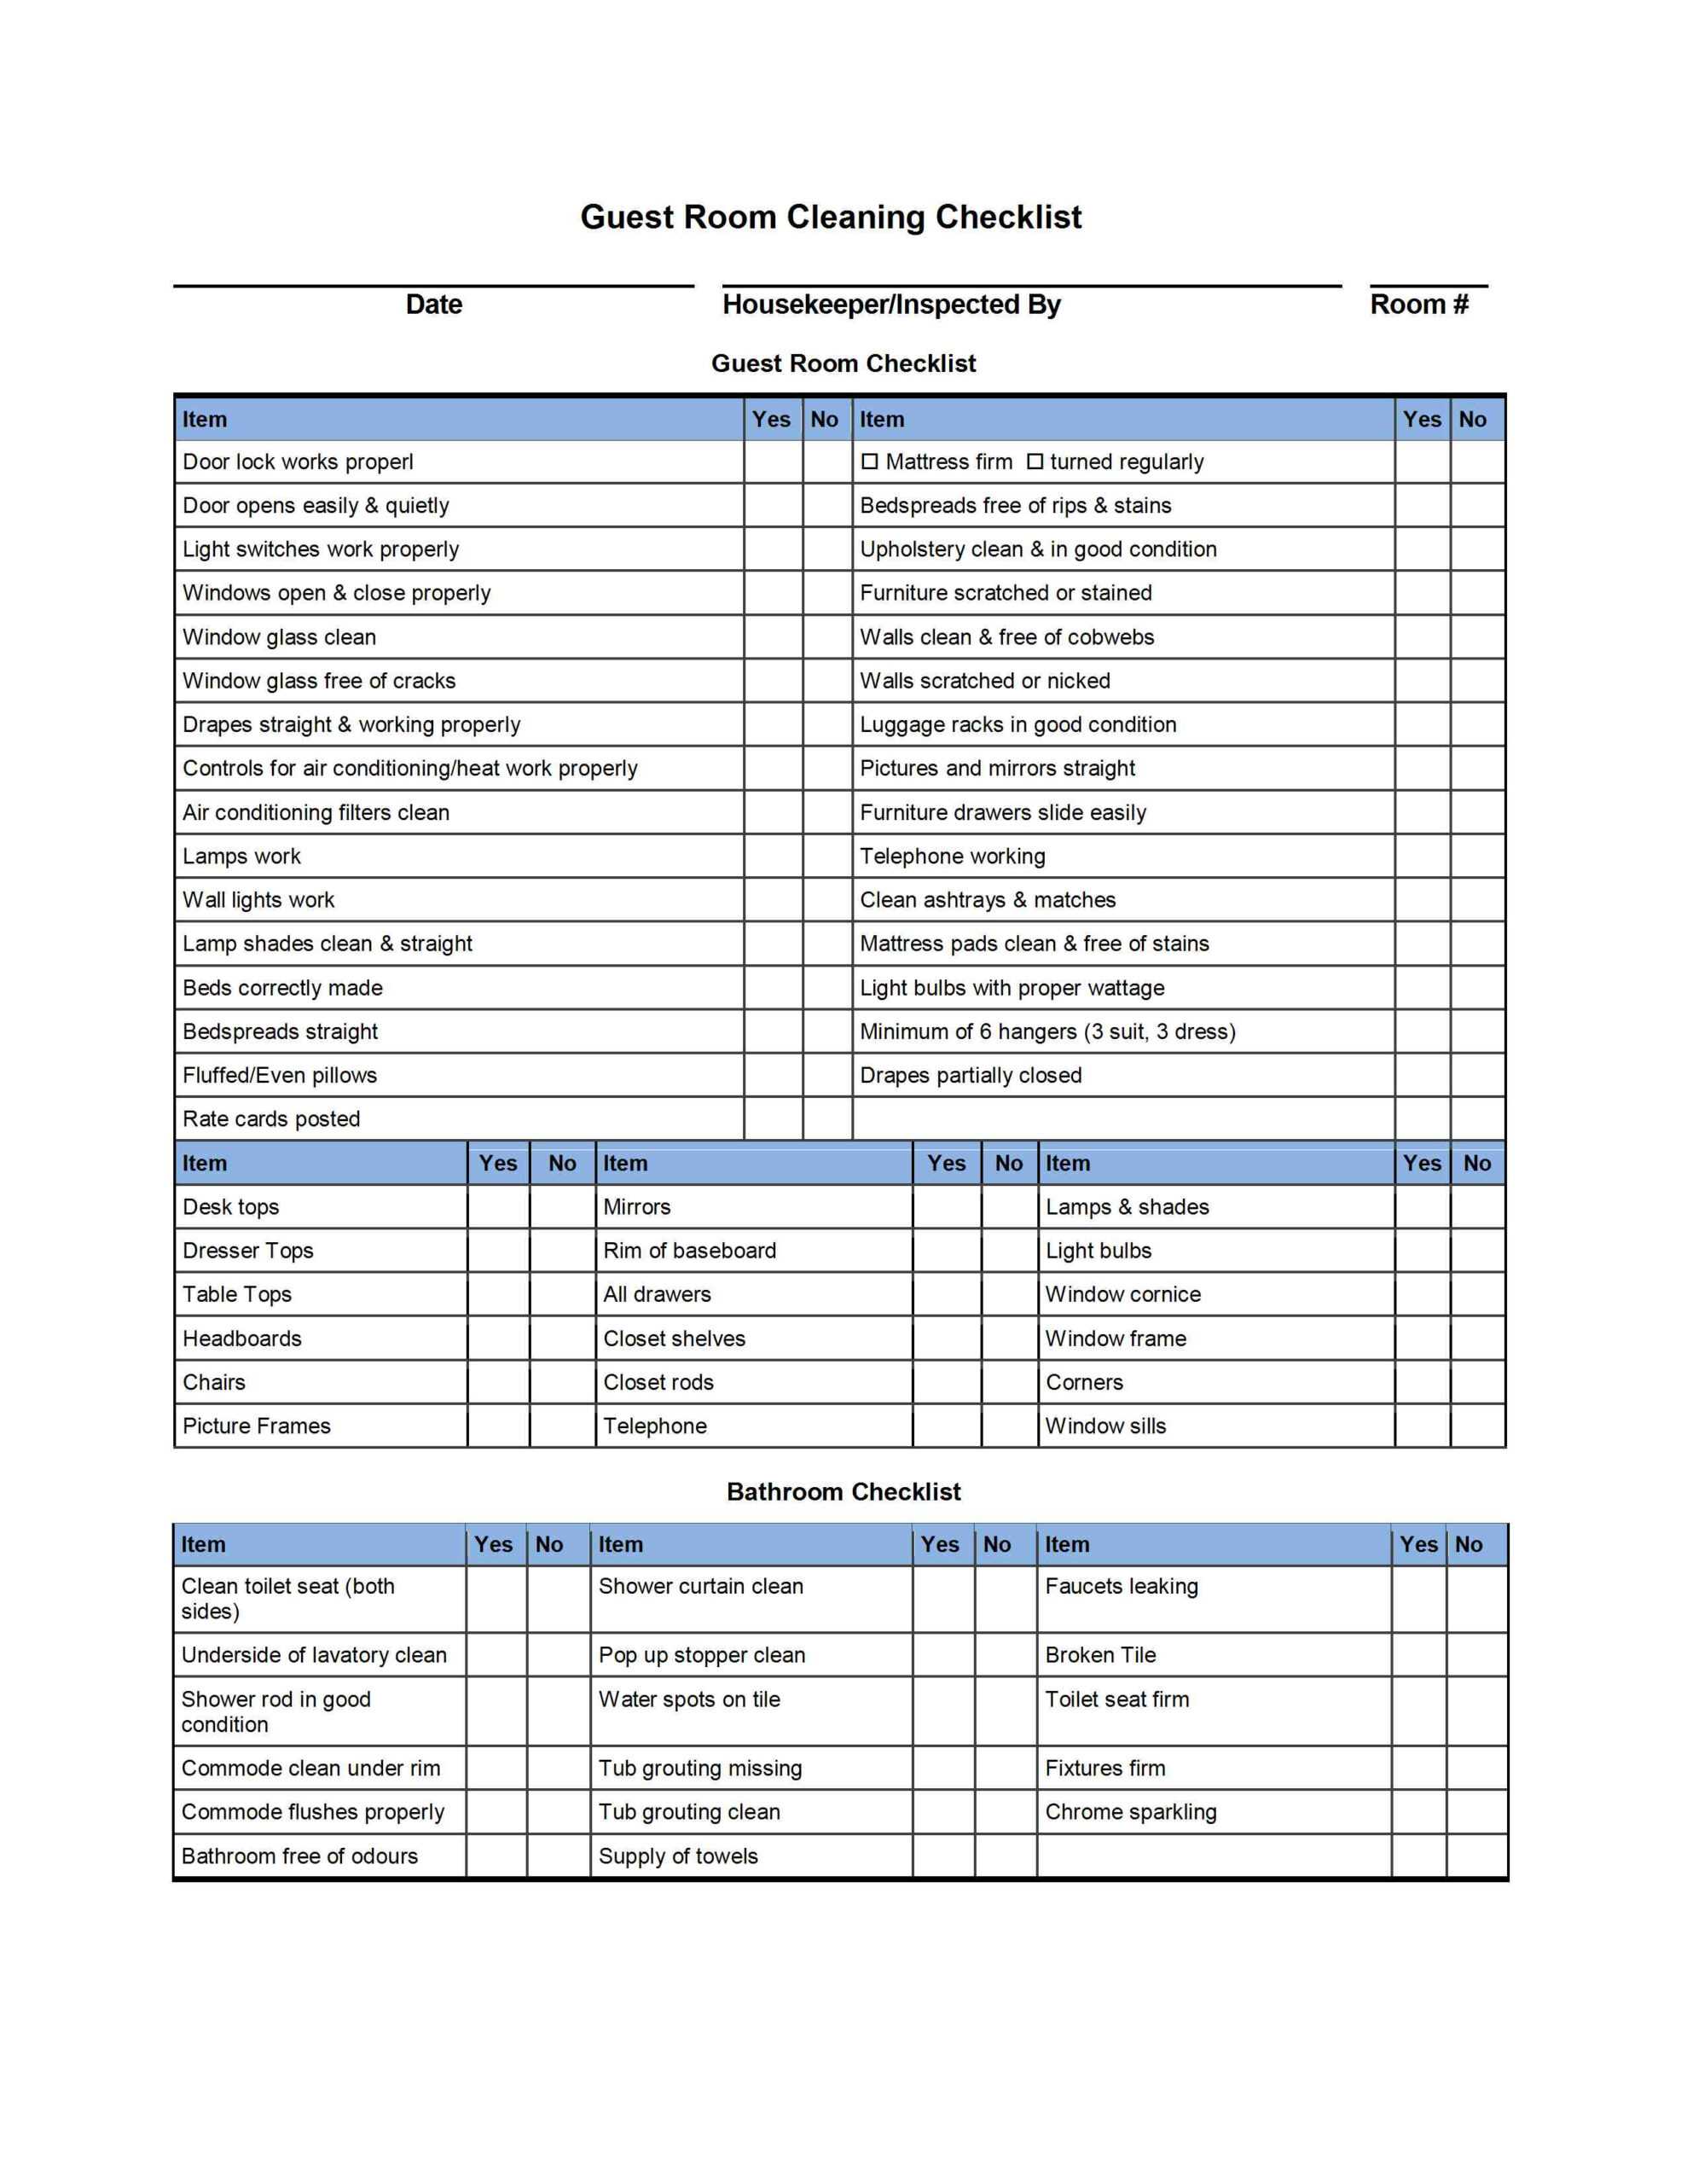 Guest Room Cleaning Checklist Template With Table Checklist Pertaining To Cleaning Report Template